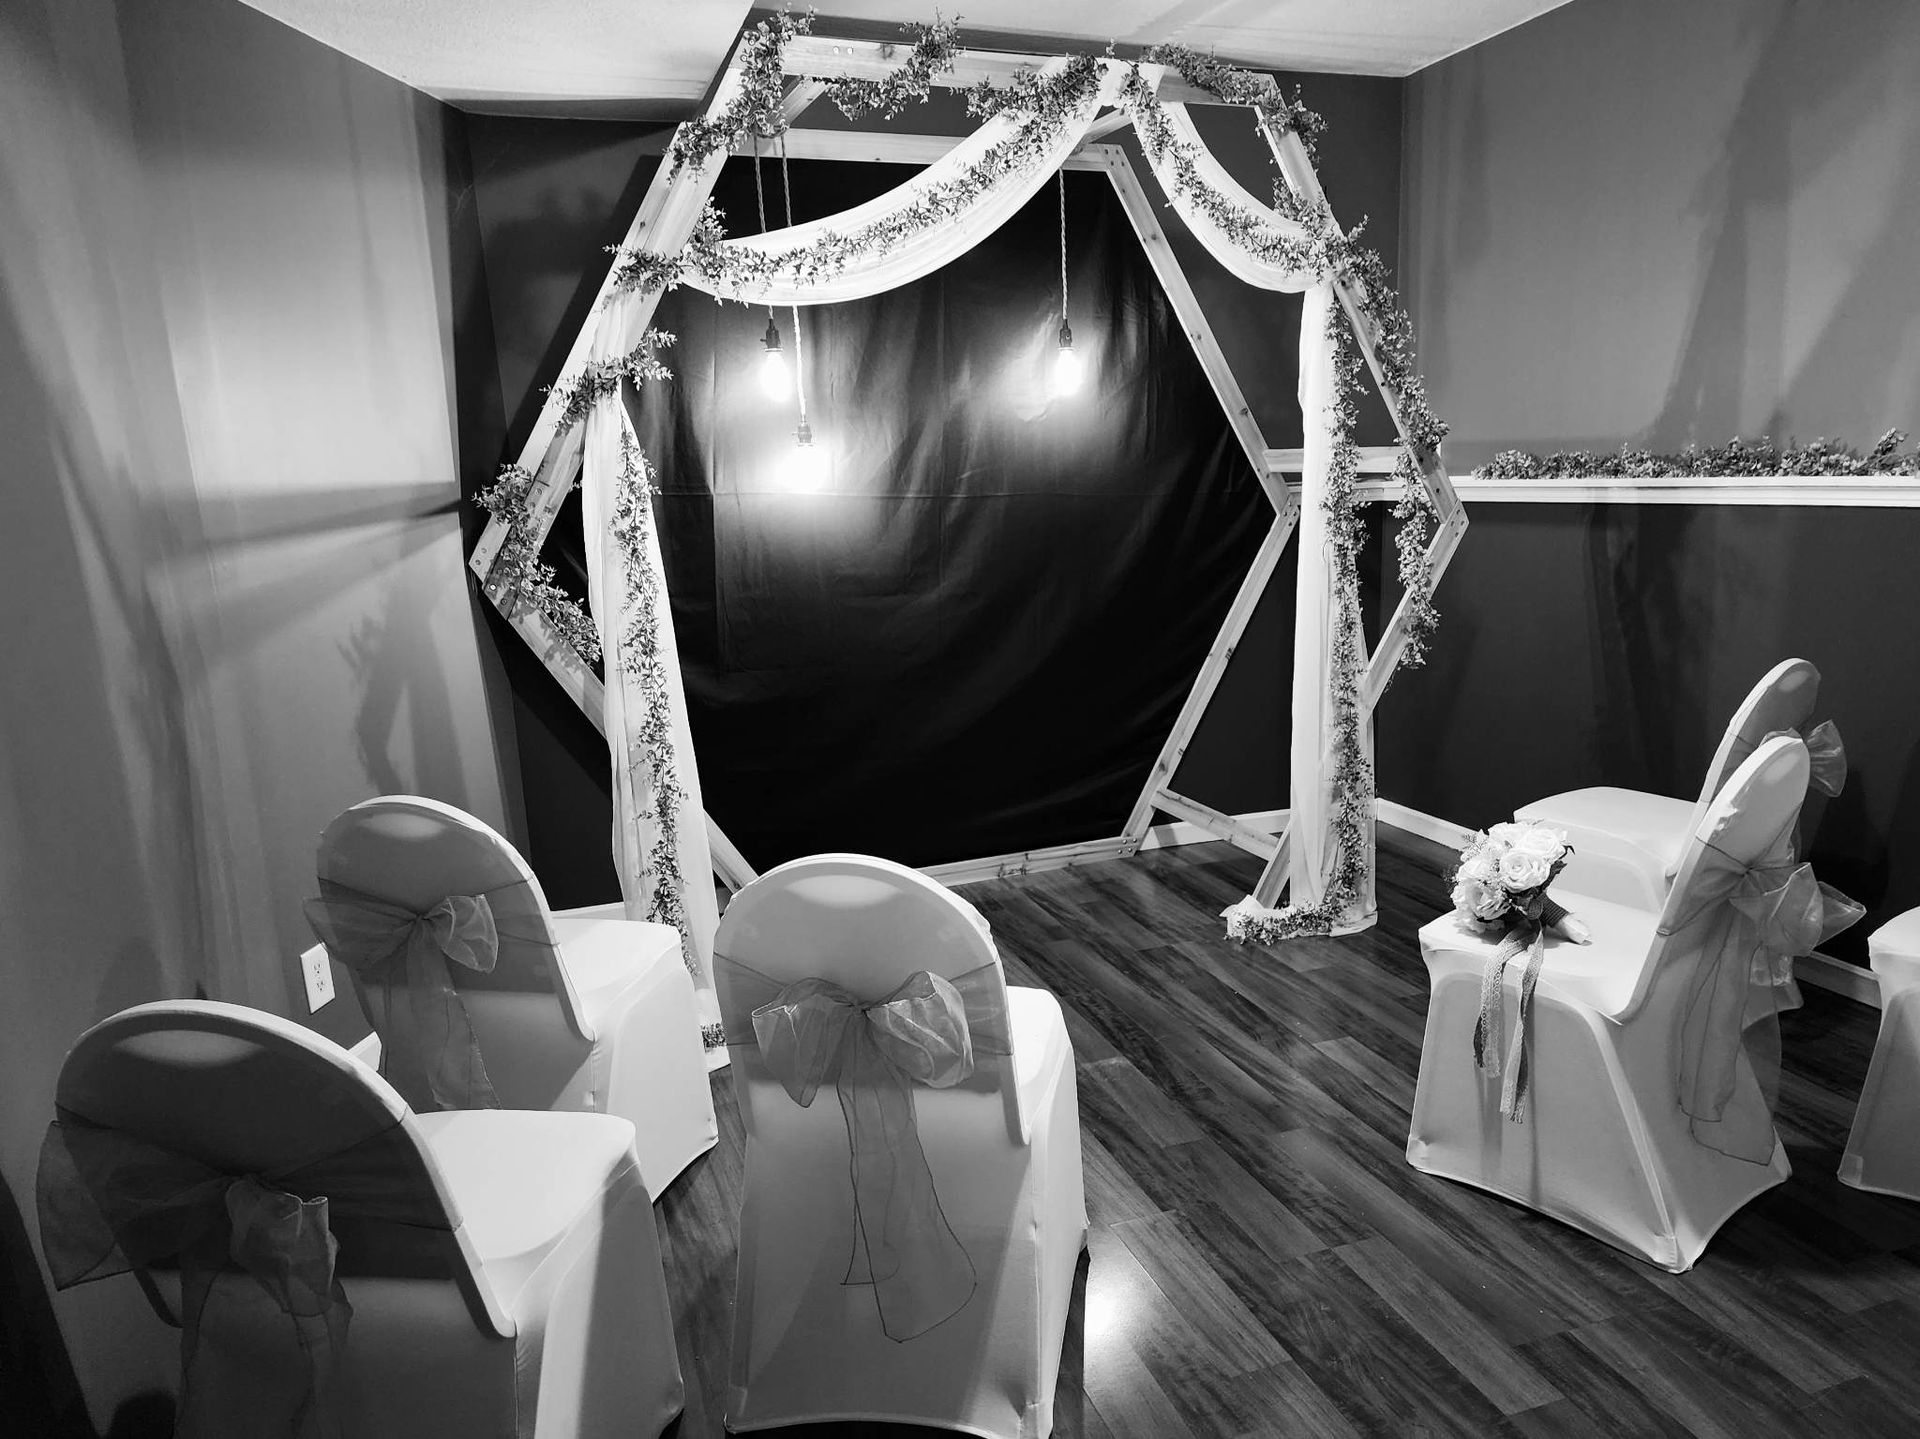 a black and white photo of a room with chairs and a wedding arch .